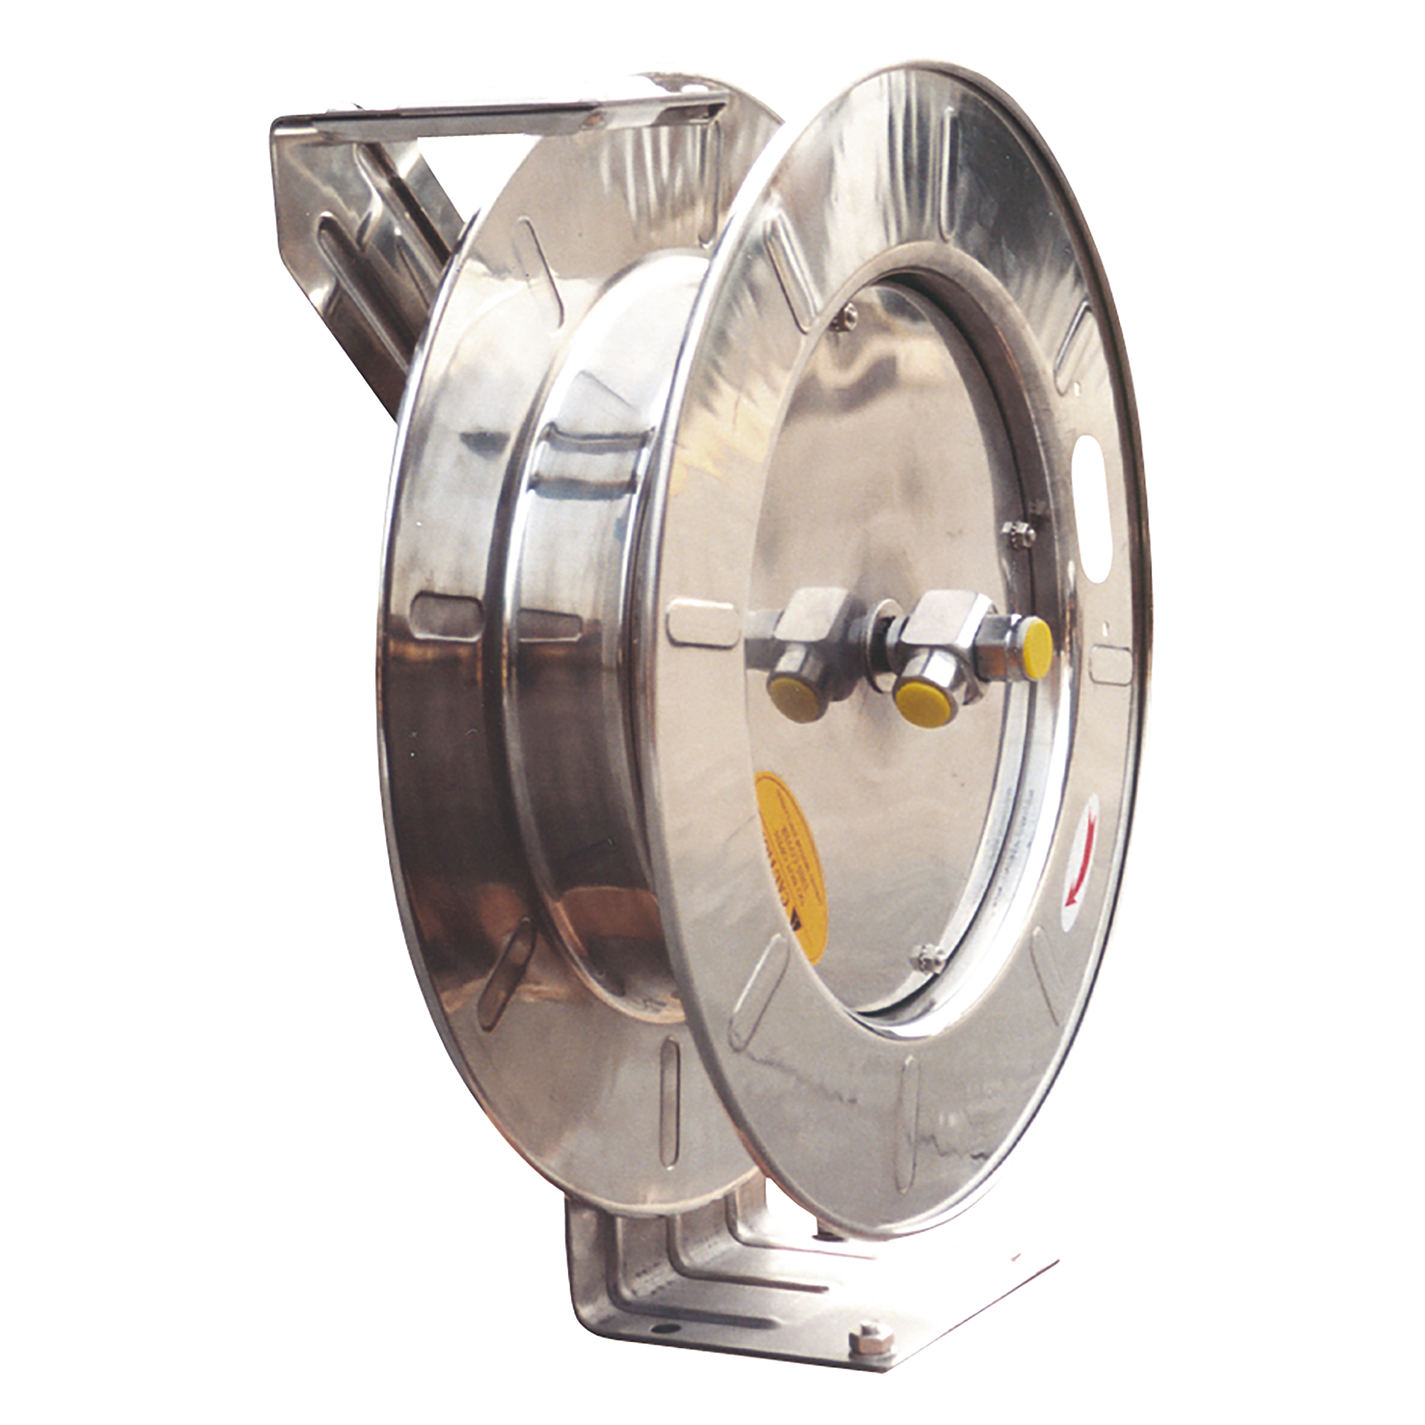 STAINLESS 1/2" HOSE REEL